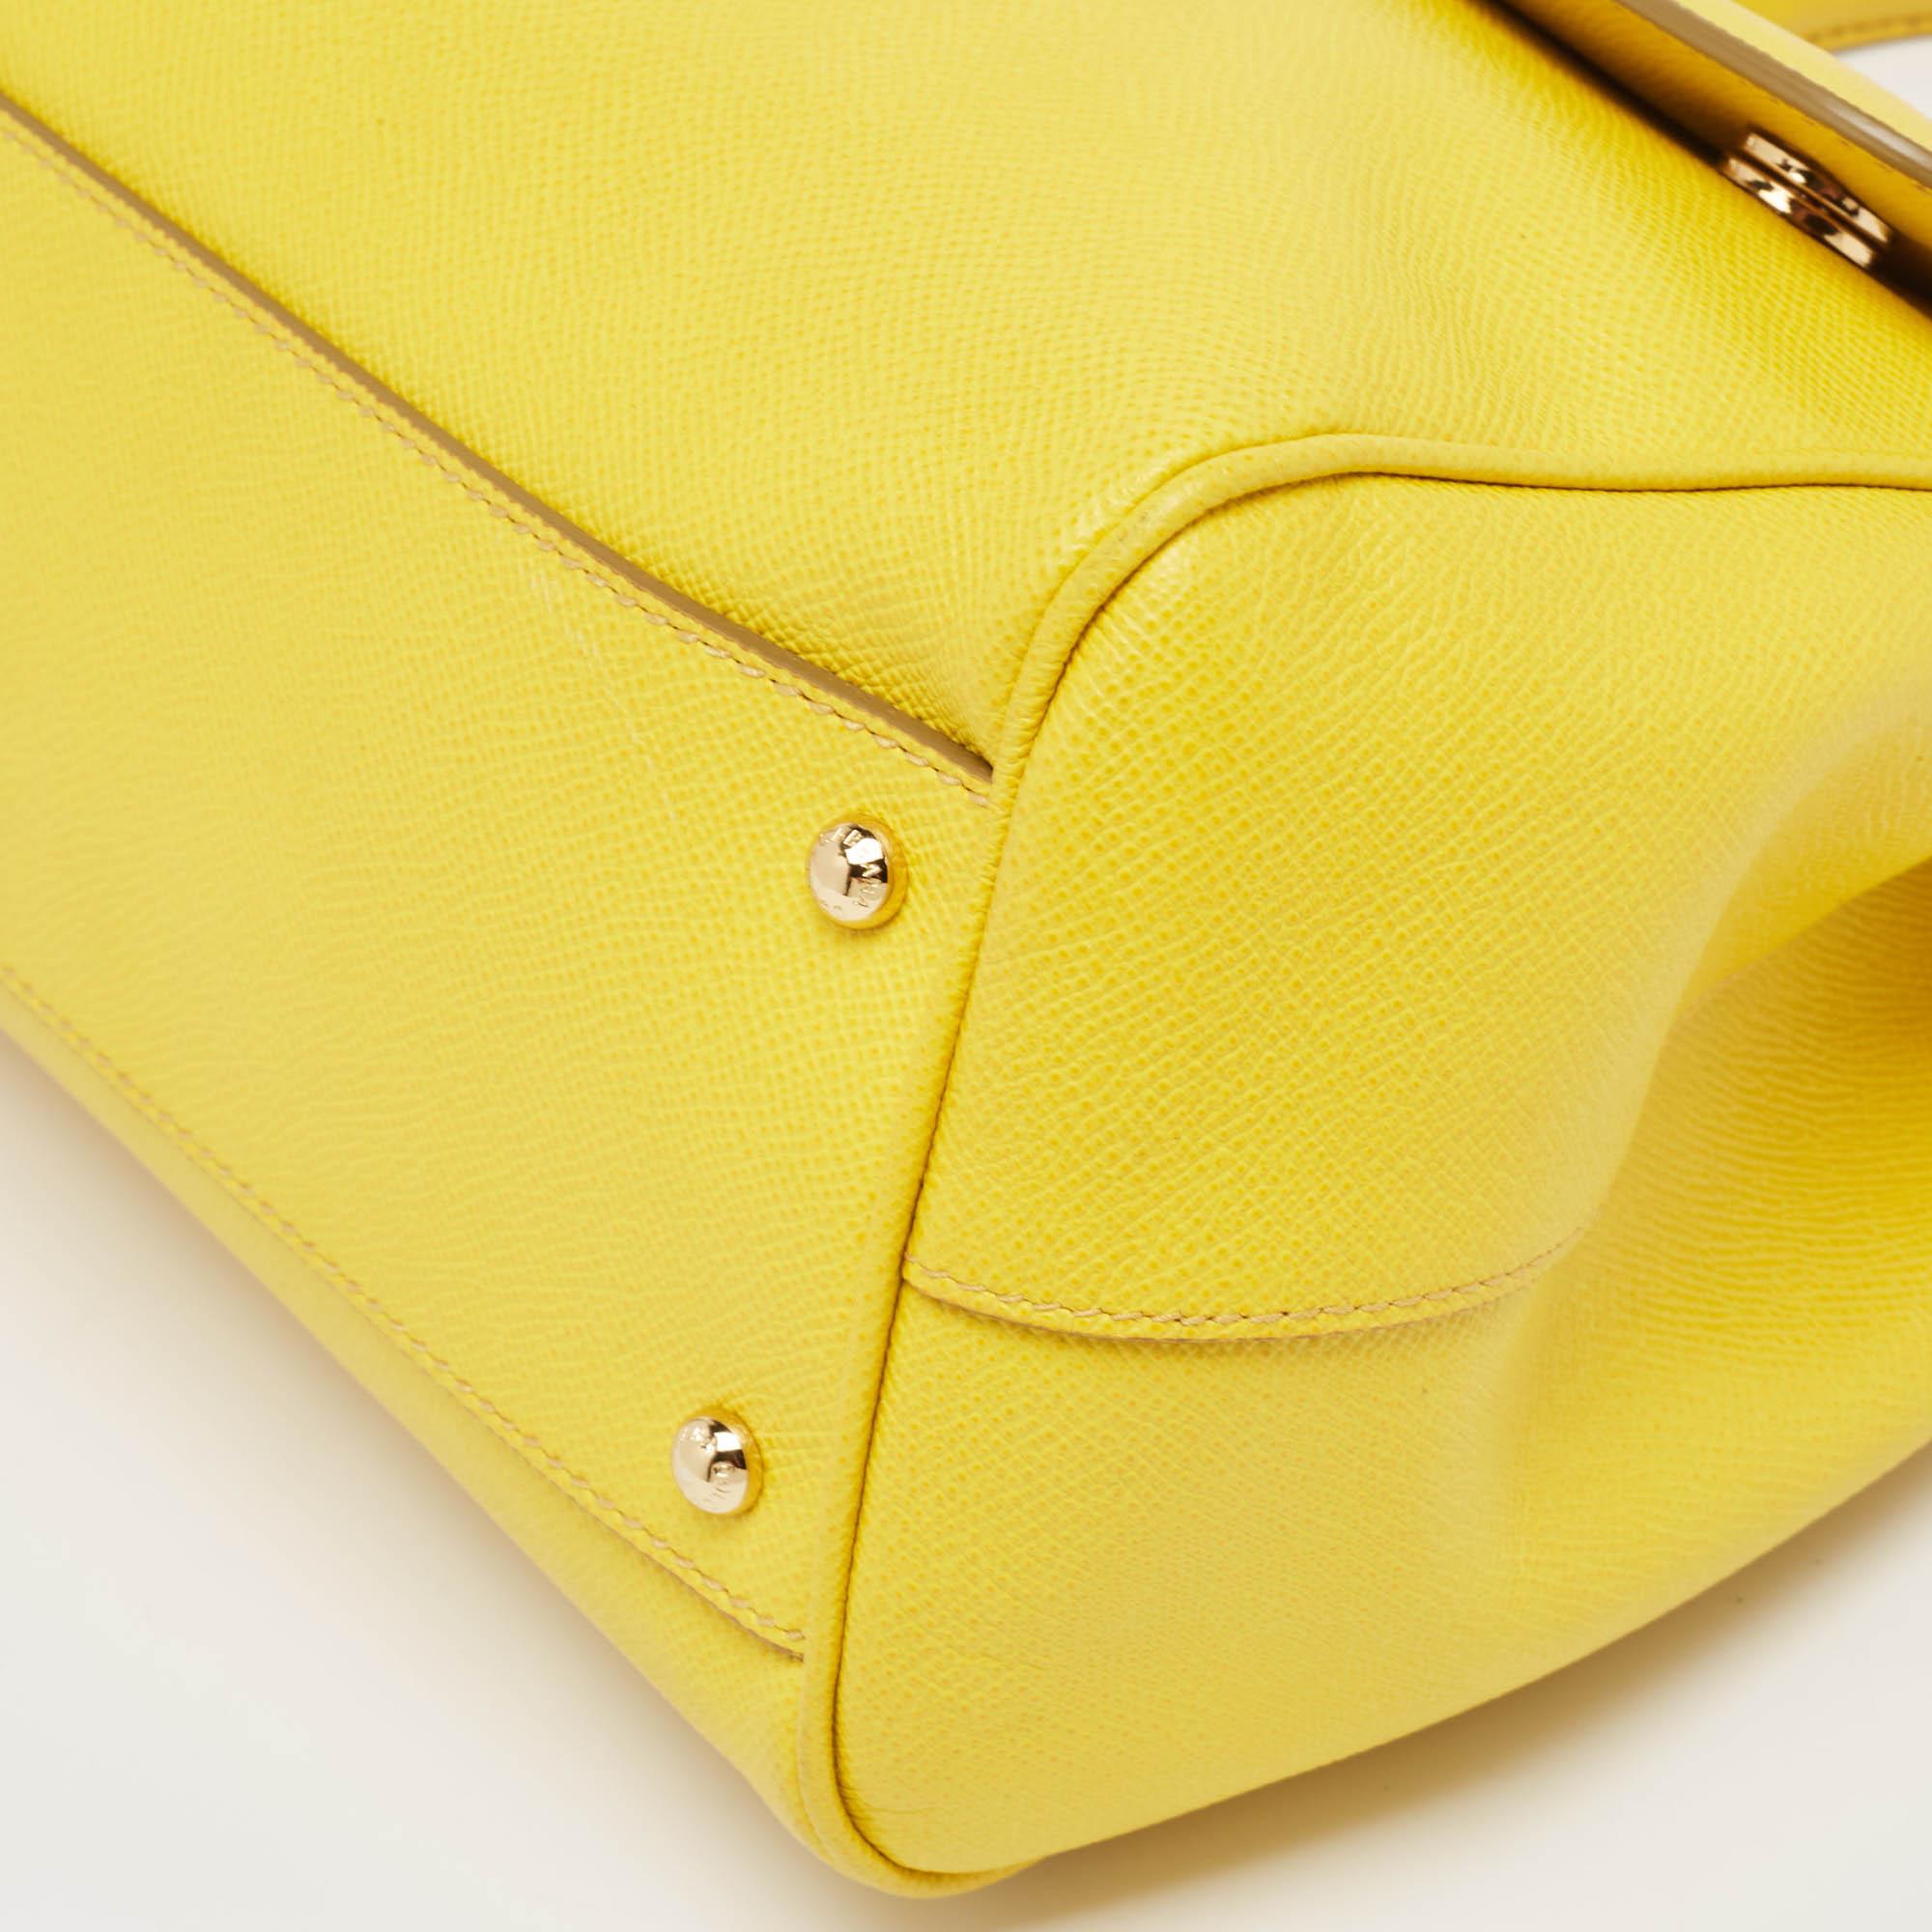 Dolce & Gabbana Yellow Leather Large Miss Sicily Top Handle Bag 8